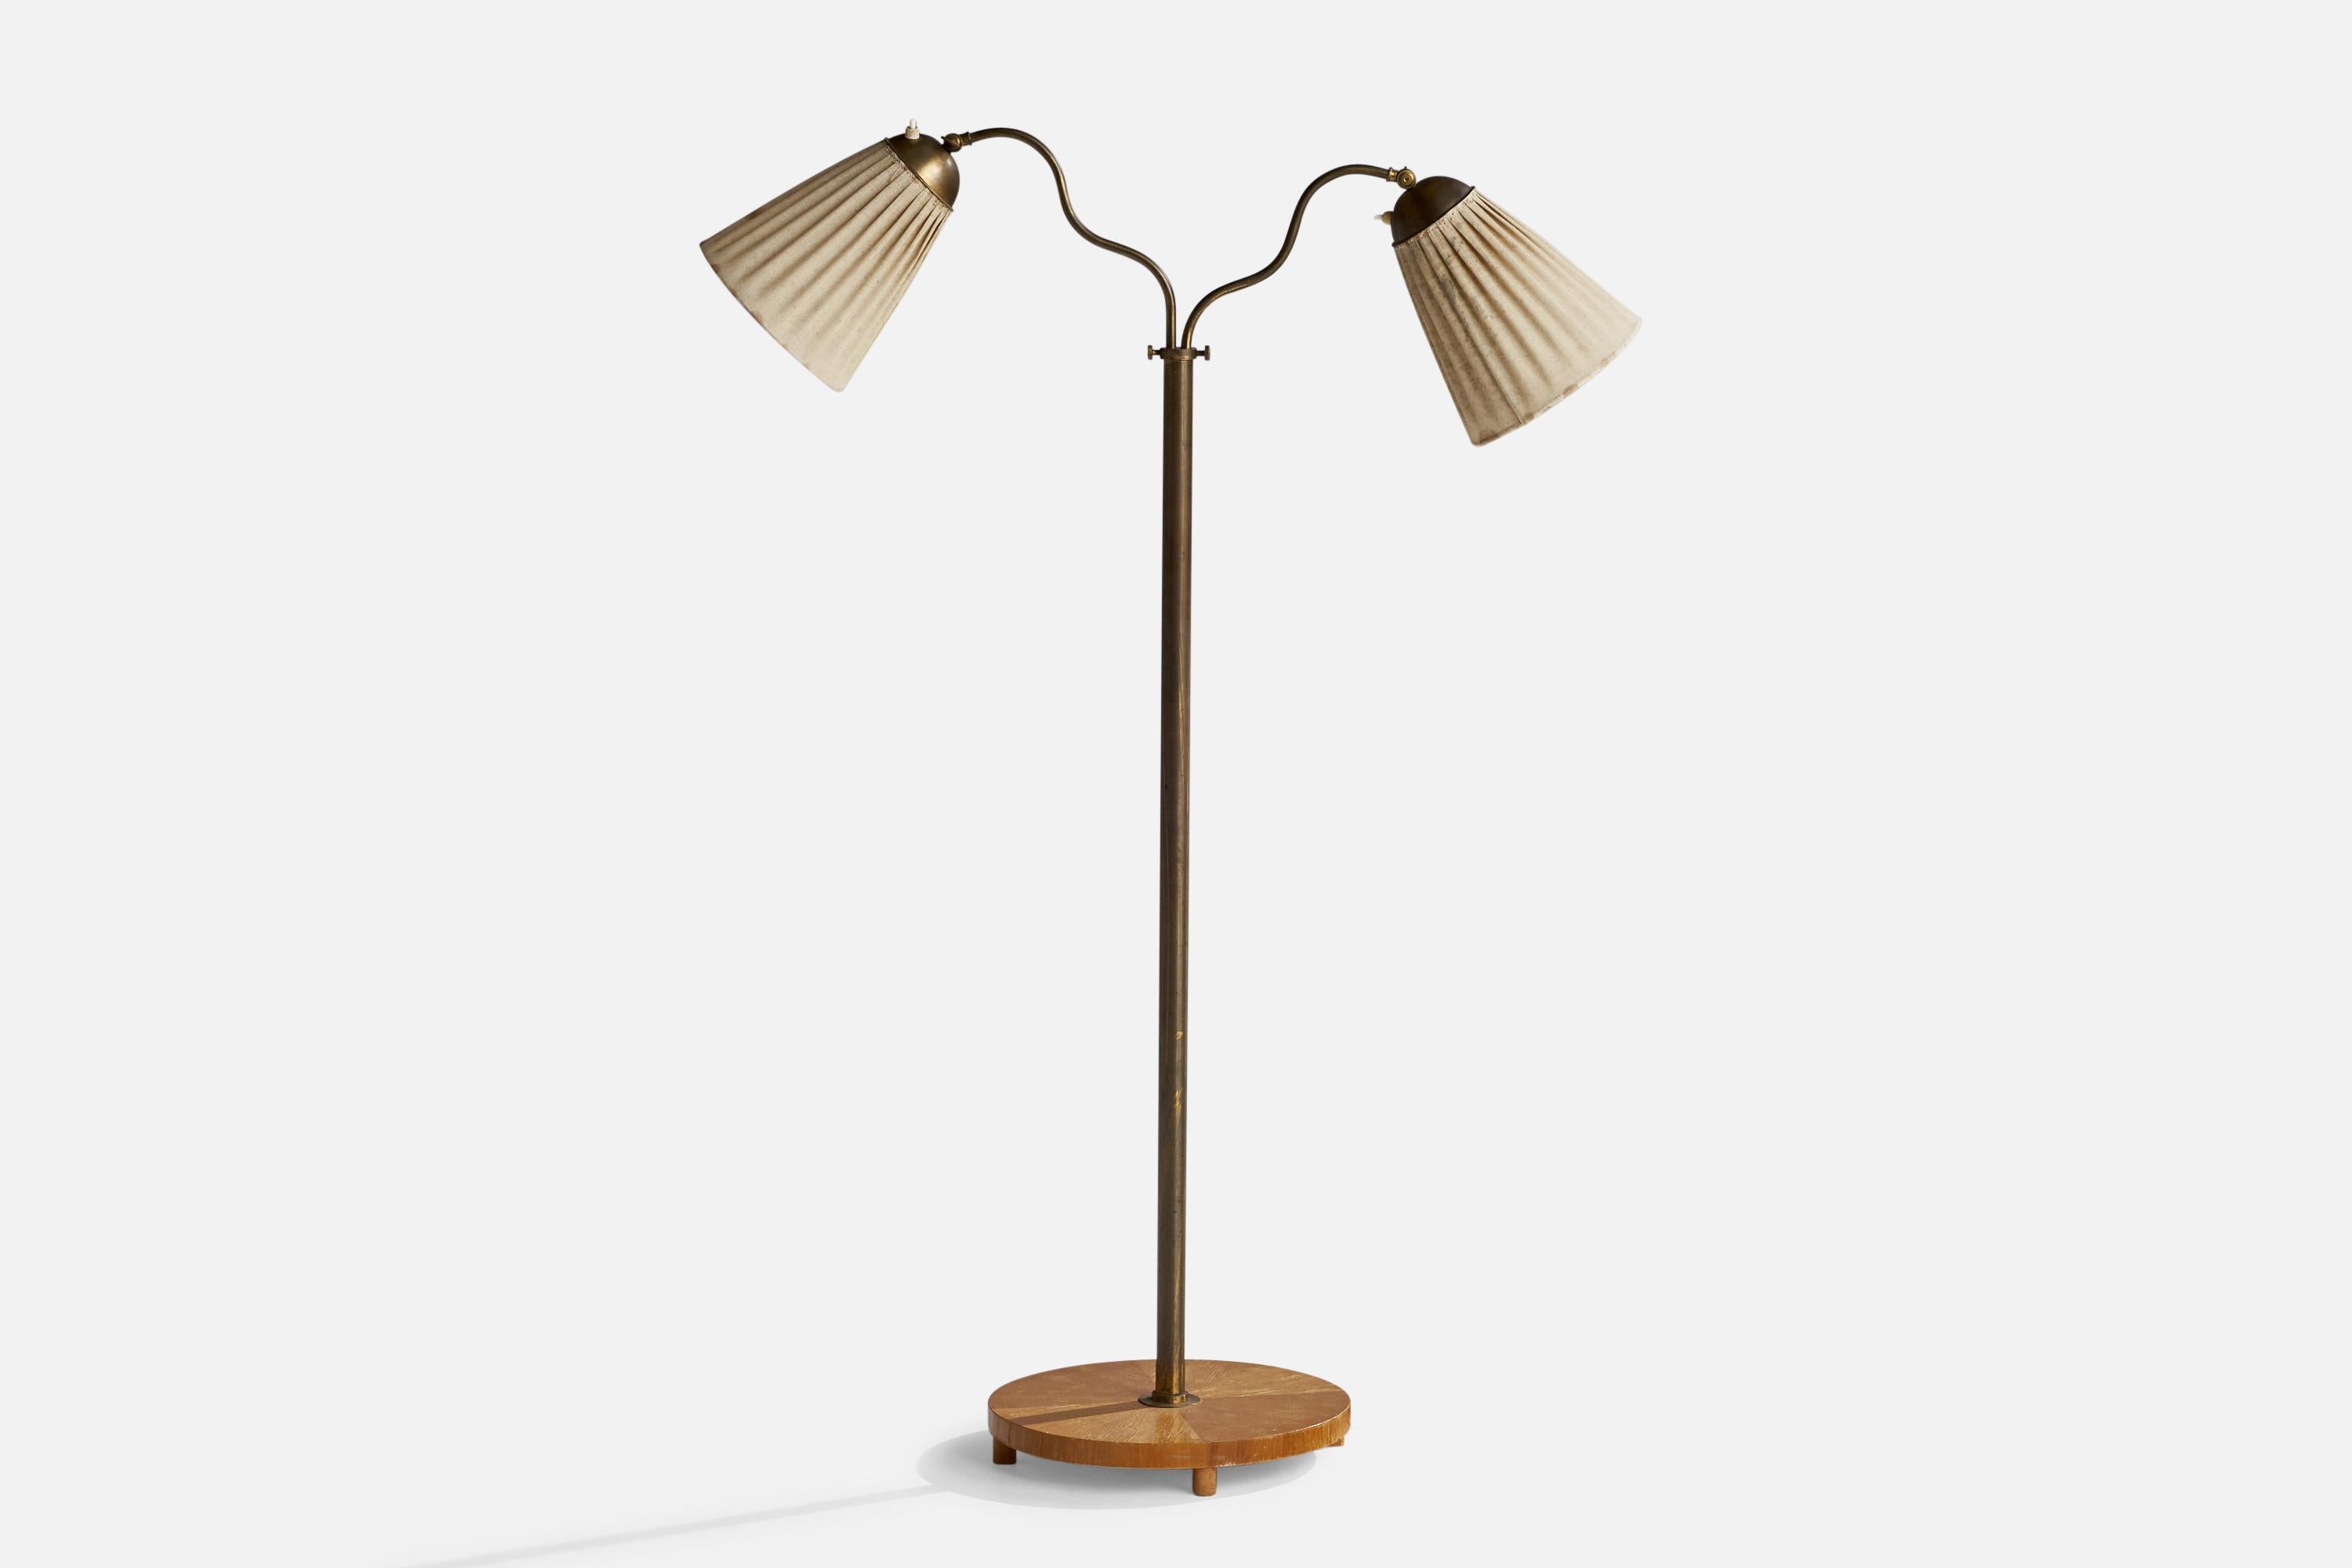 An adjustable floor lamp designed and produced in Sweden, 1940s.

Dimension variable.

Overall Dimensions (inches): 50.5” H x 33” W x 33” D
Stated dimensions include shade.
Bulb Specifications: E-26 Bulb
Number of Sockets: 2
All lighting will be